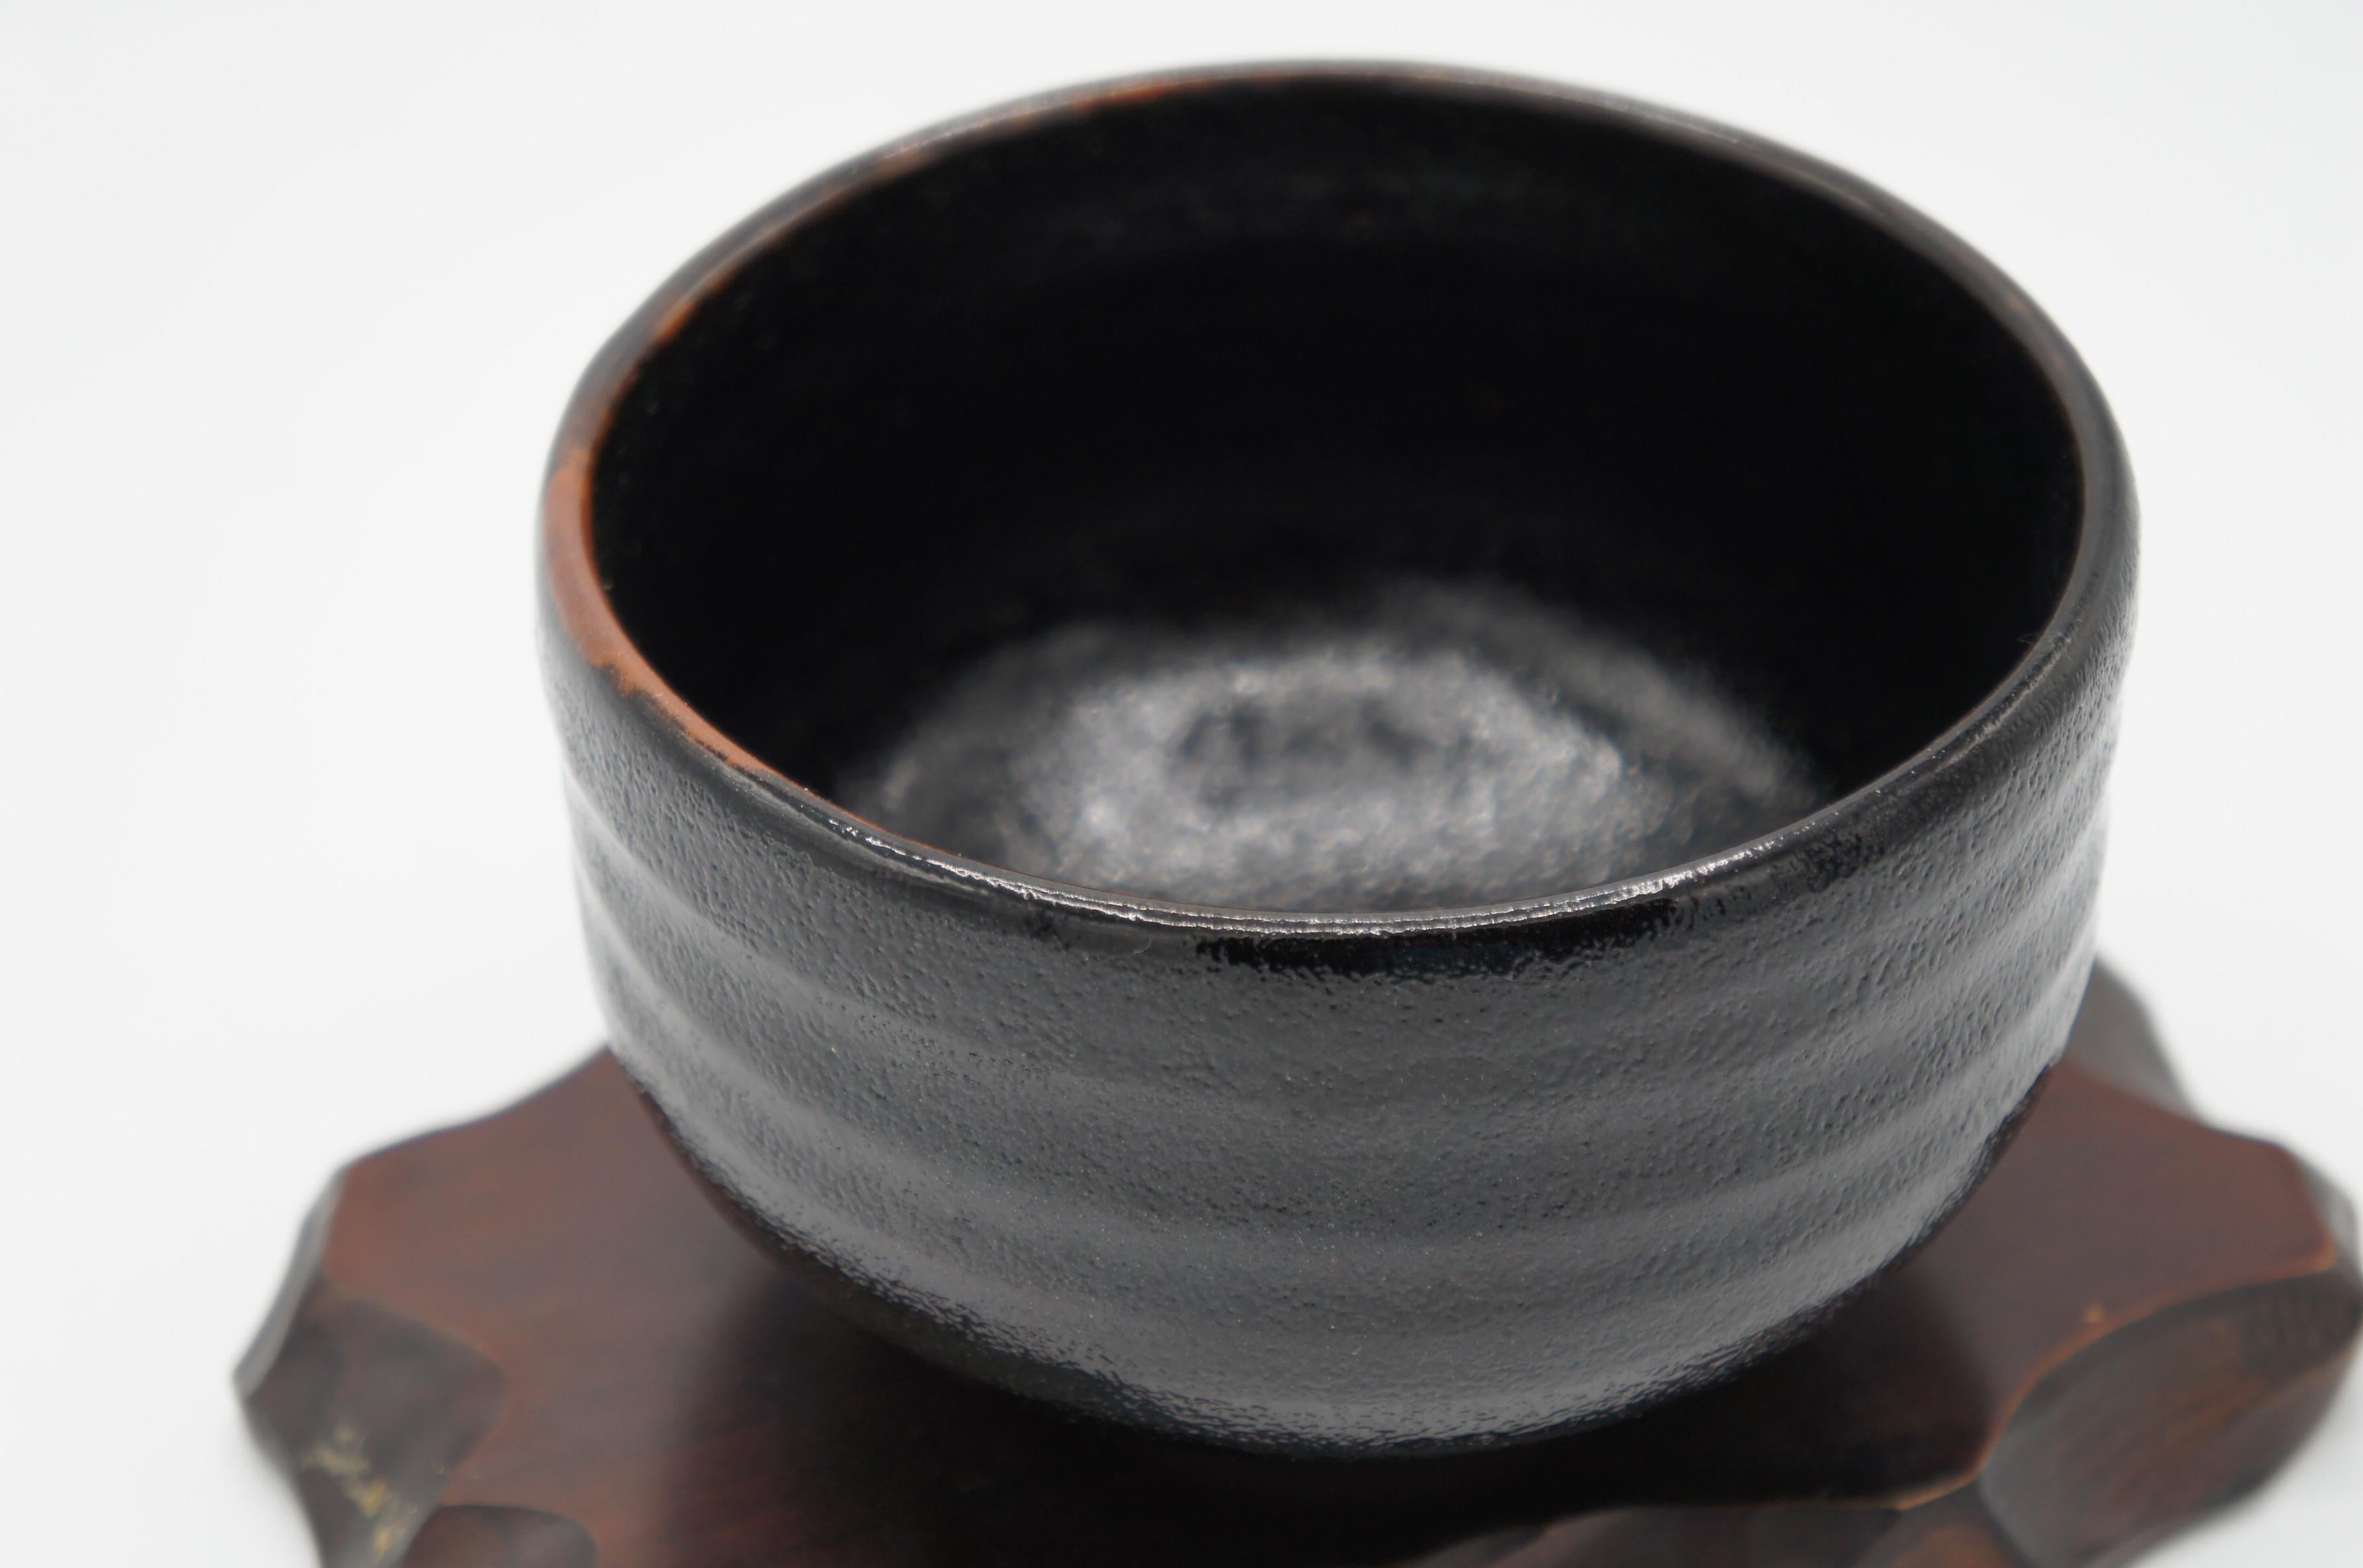 This is an antique Japanese Matcha bowl.
This Matcha bowl is normally used for tea ceremony in Japan.
It is made with porcelain and it was made around 1970s in Showa era.
The main colour is in black and on the back bottom is in brown.